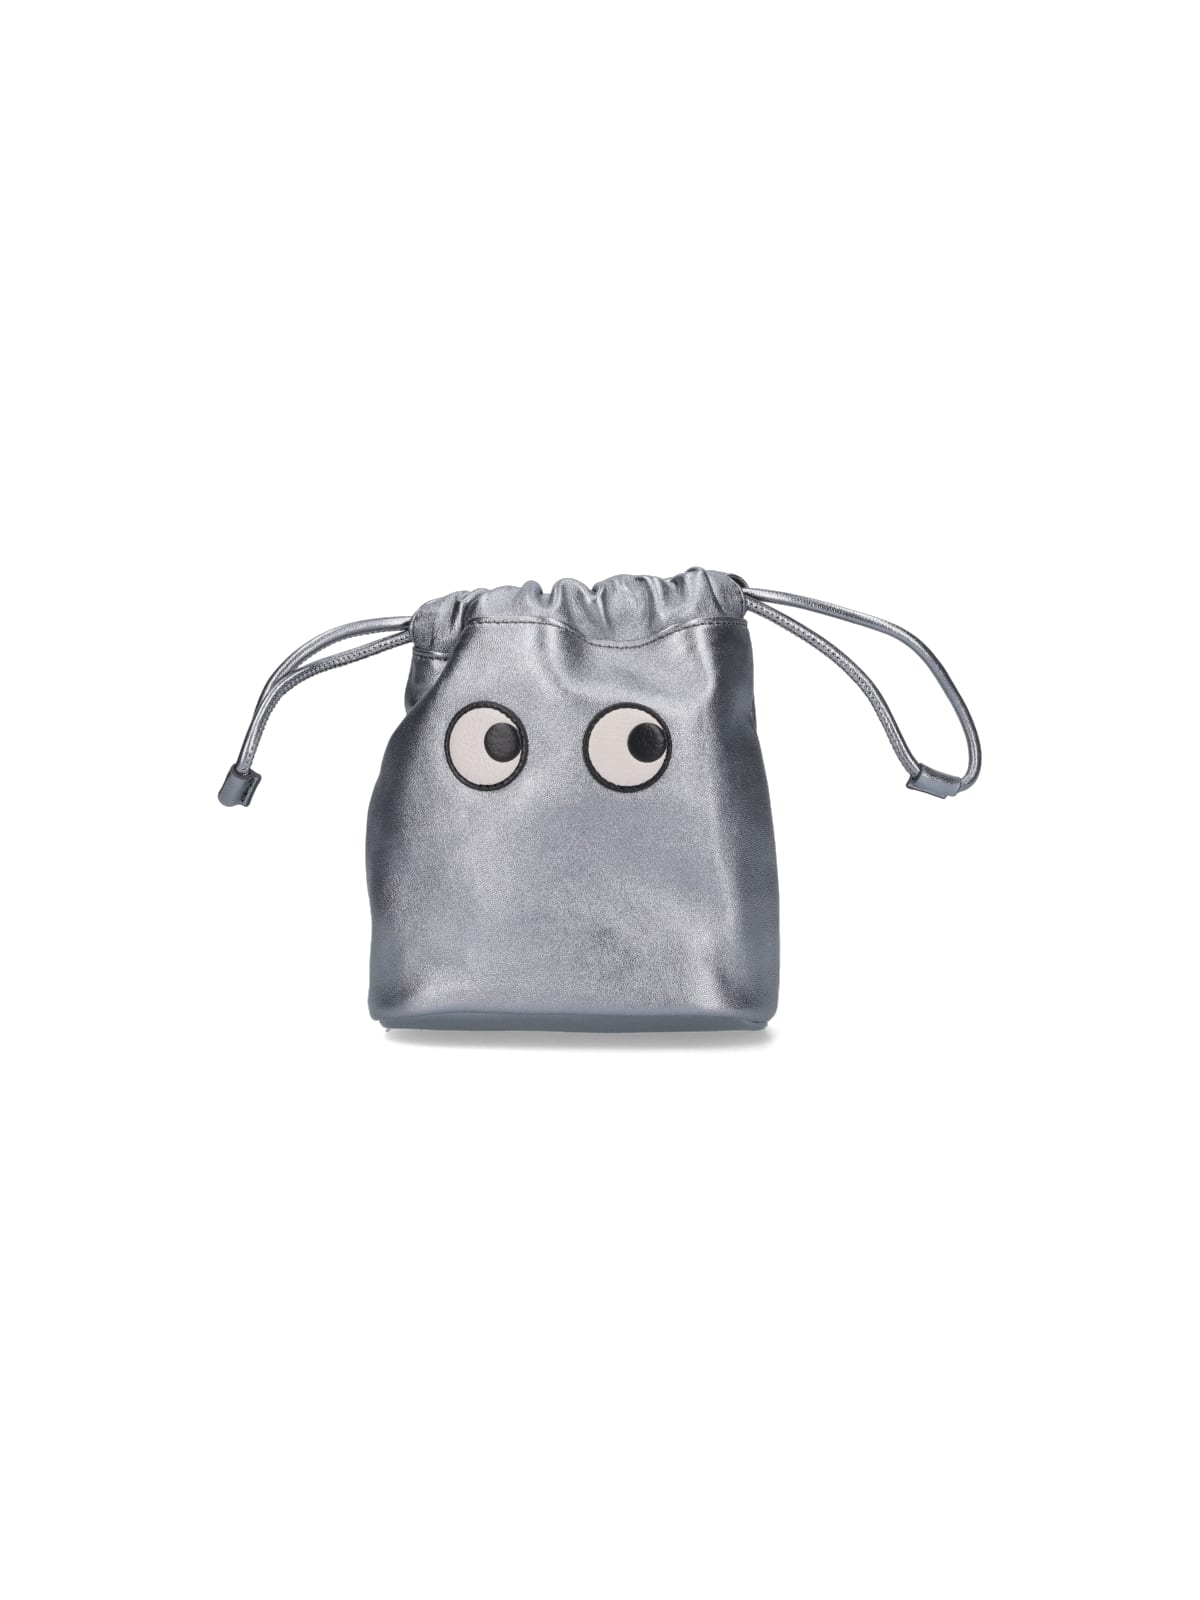 Anya Hindmarch Tote In Silver